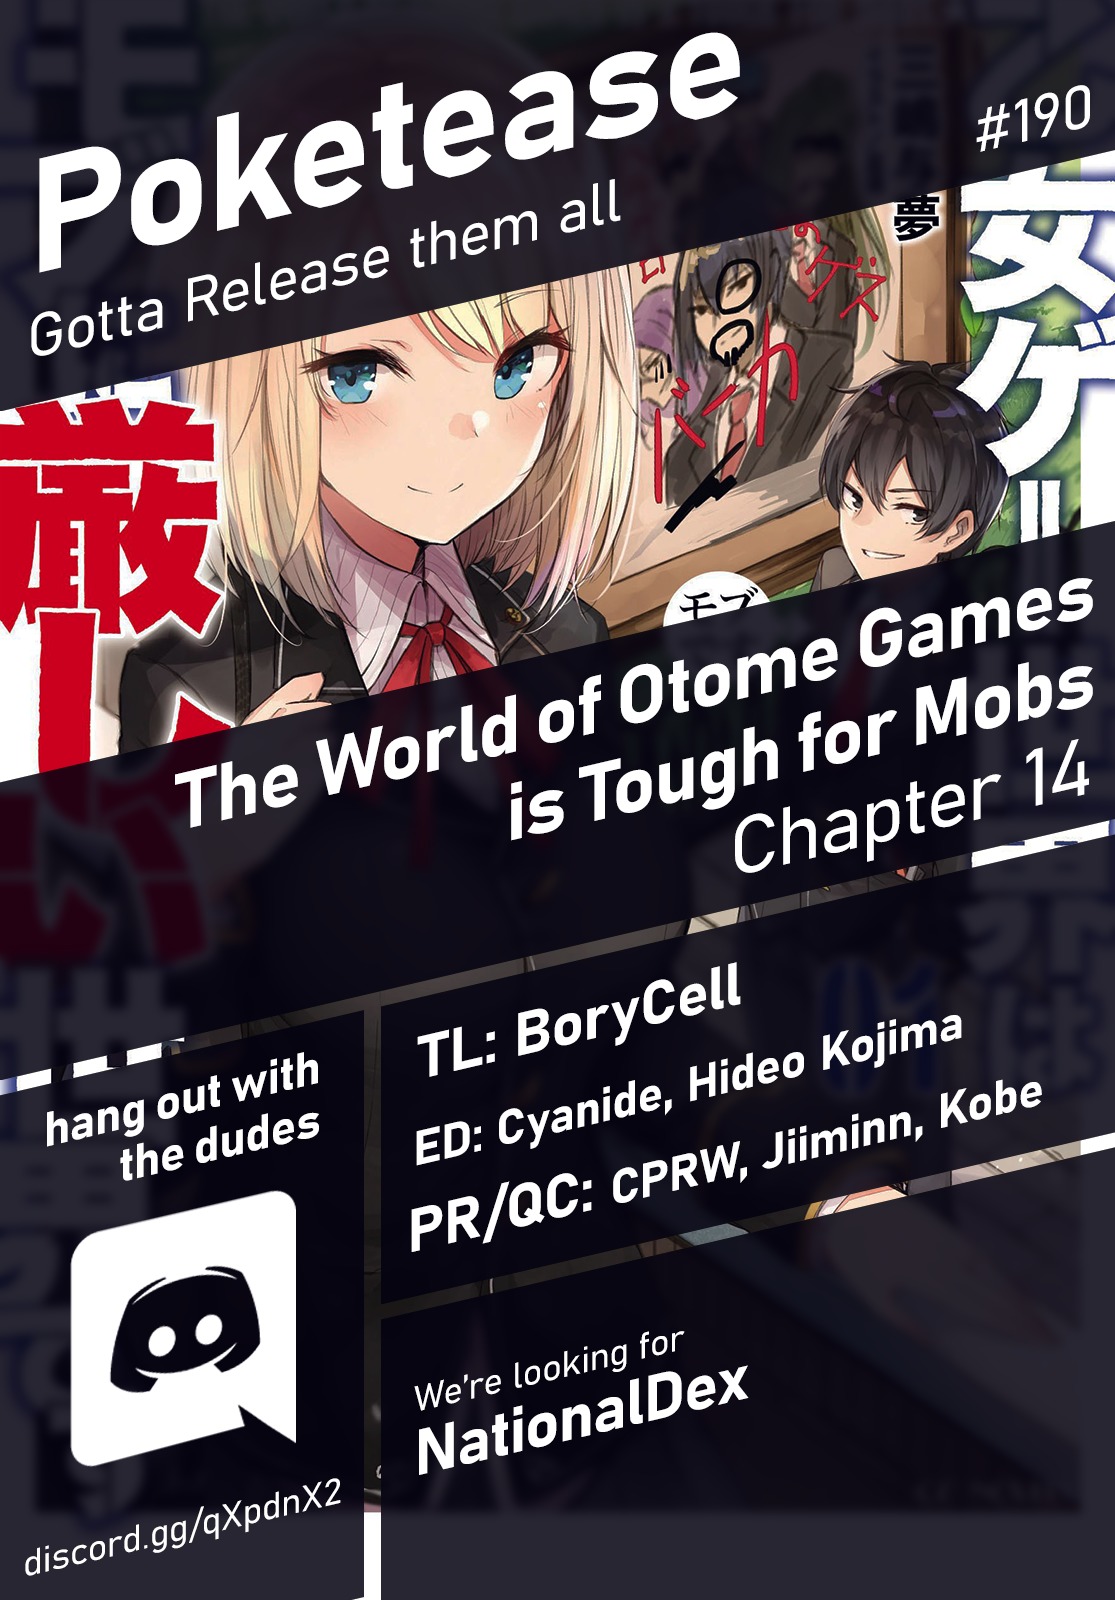 The World of Otome Games is Tough for Mobs ch.14